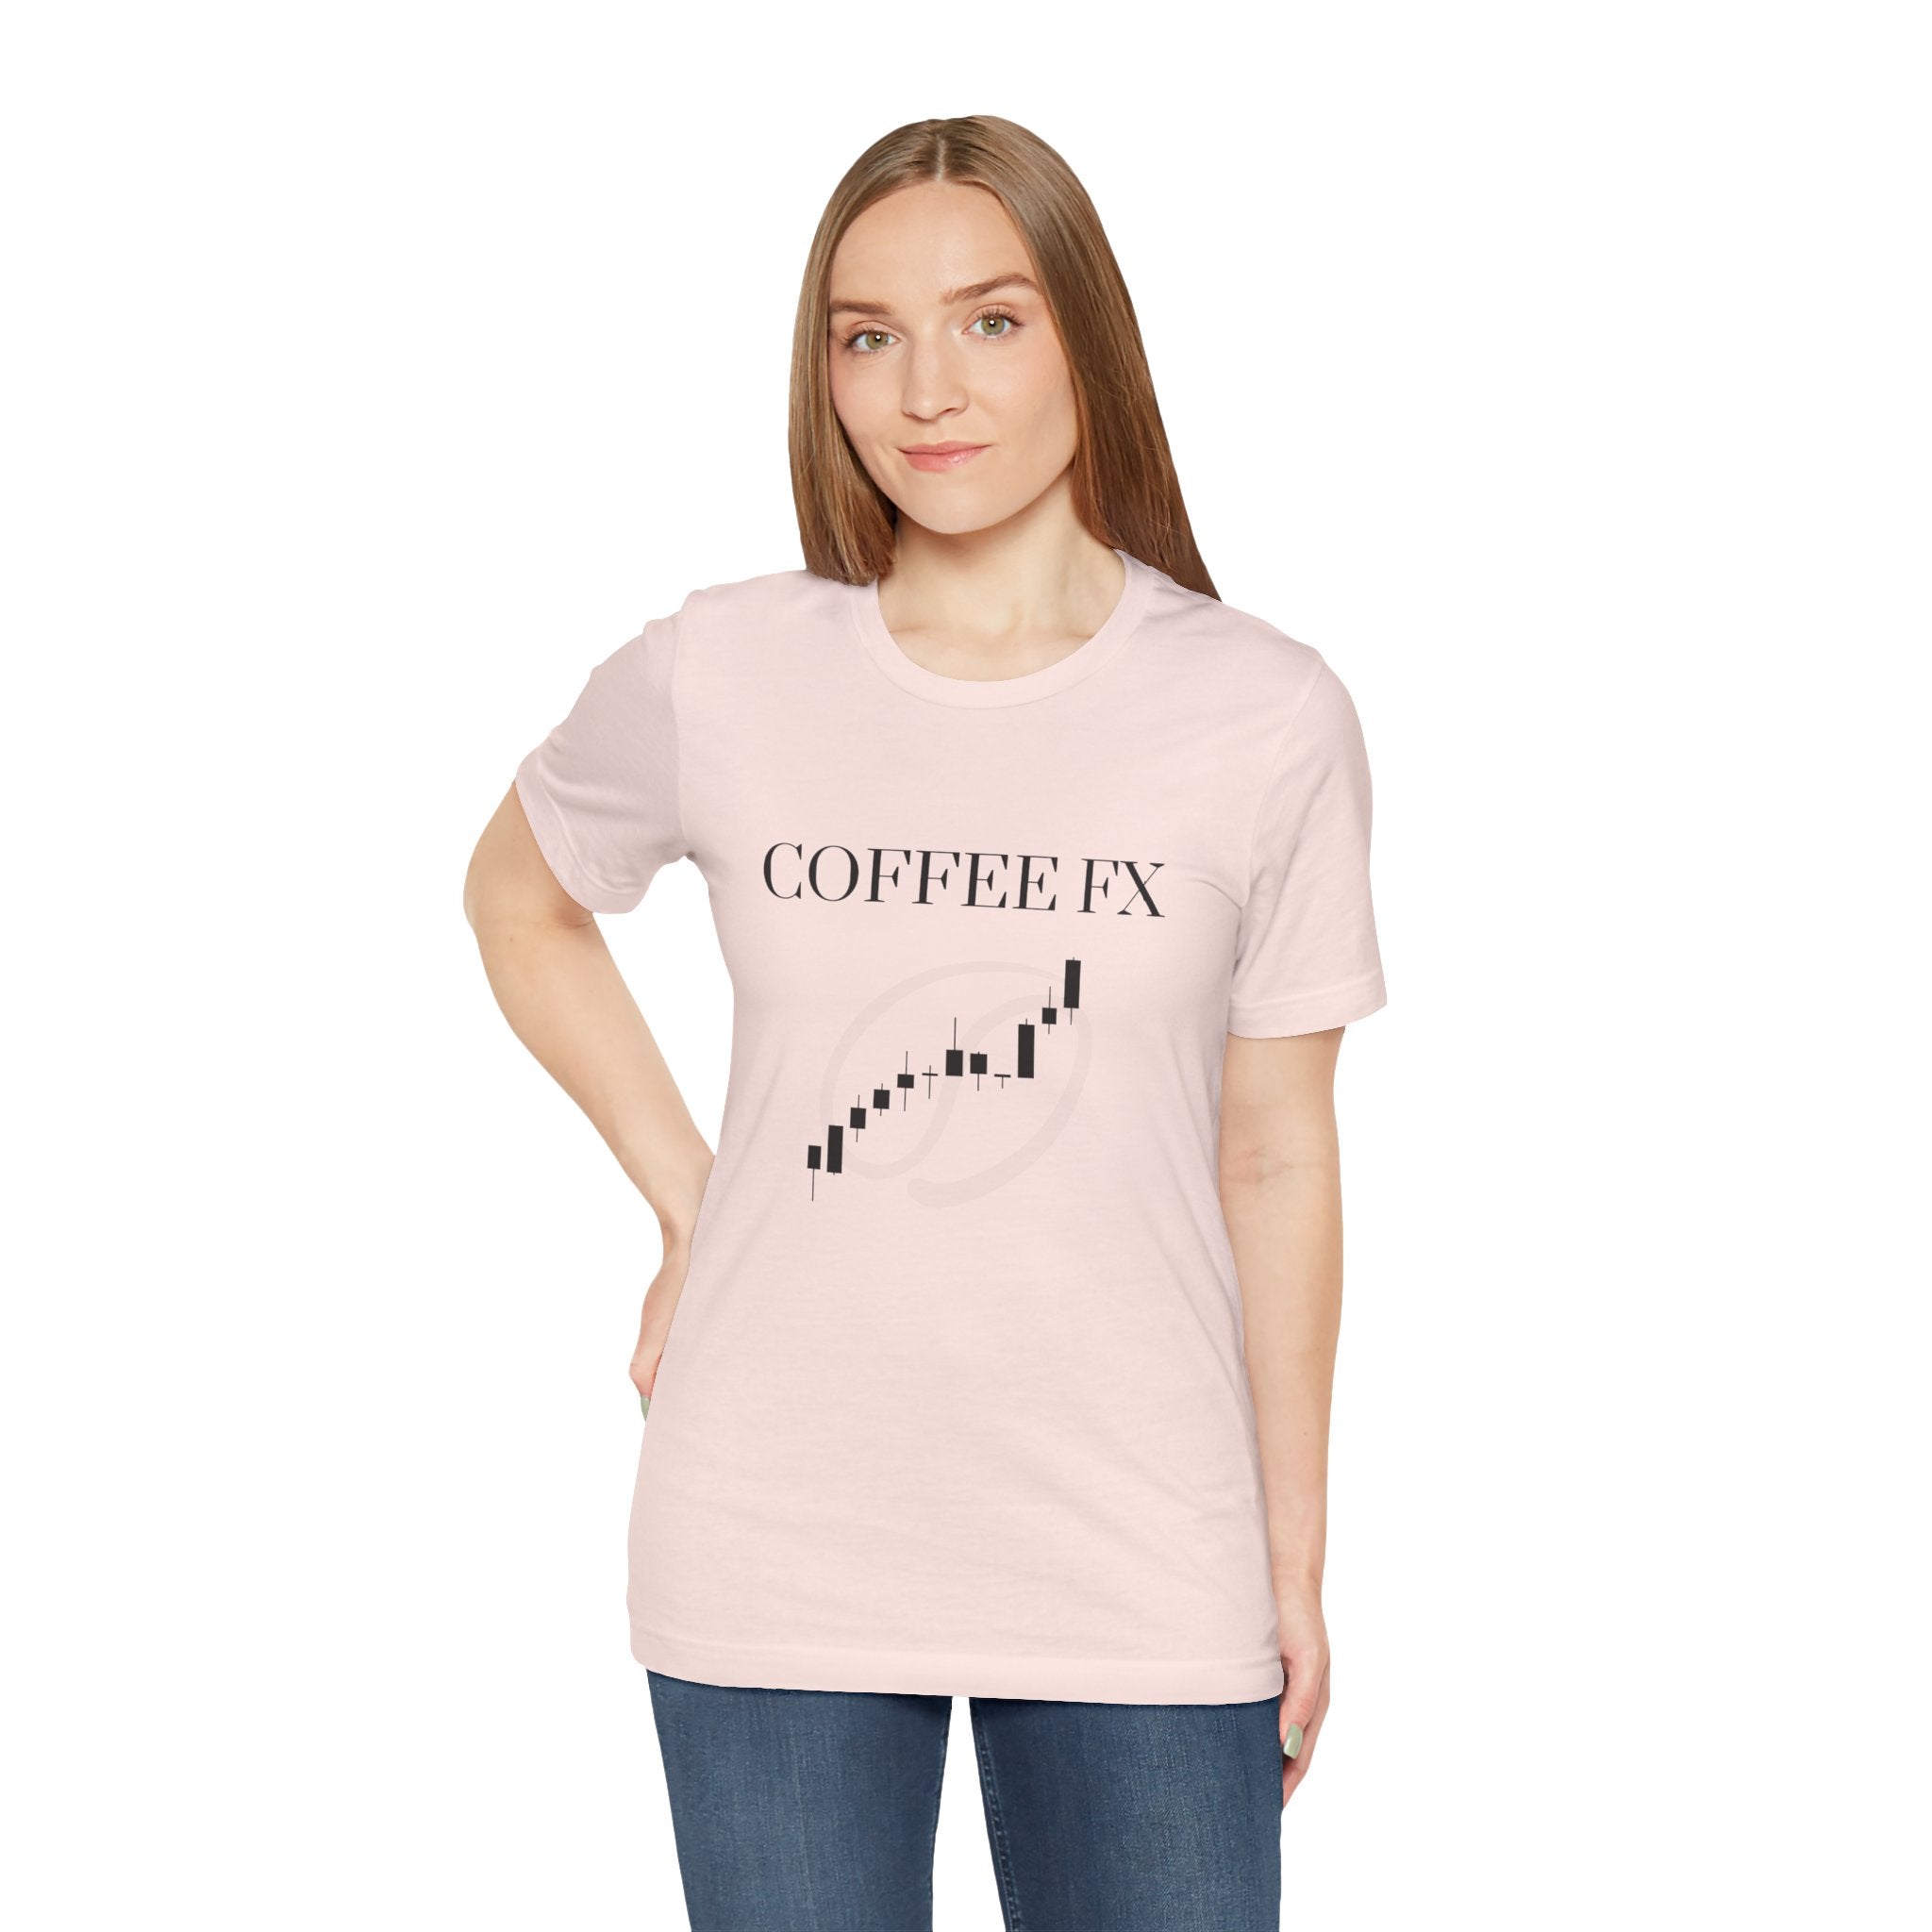 Coffee & FX Trading T-Shirt [PERFECT for currency traders]